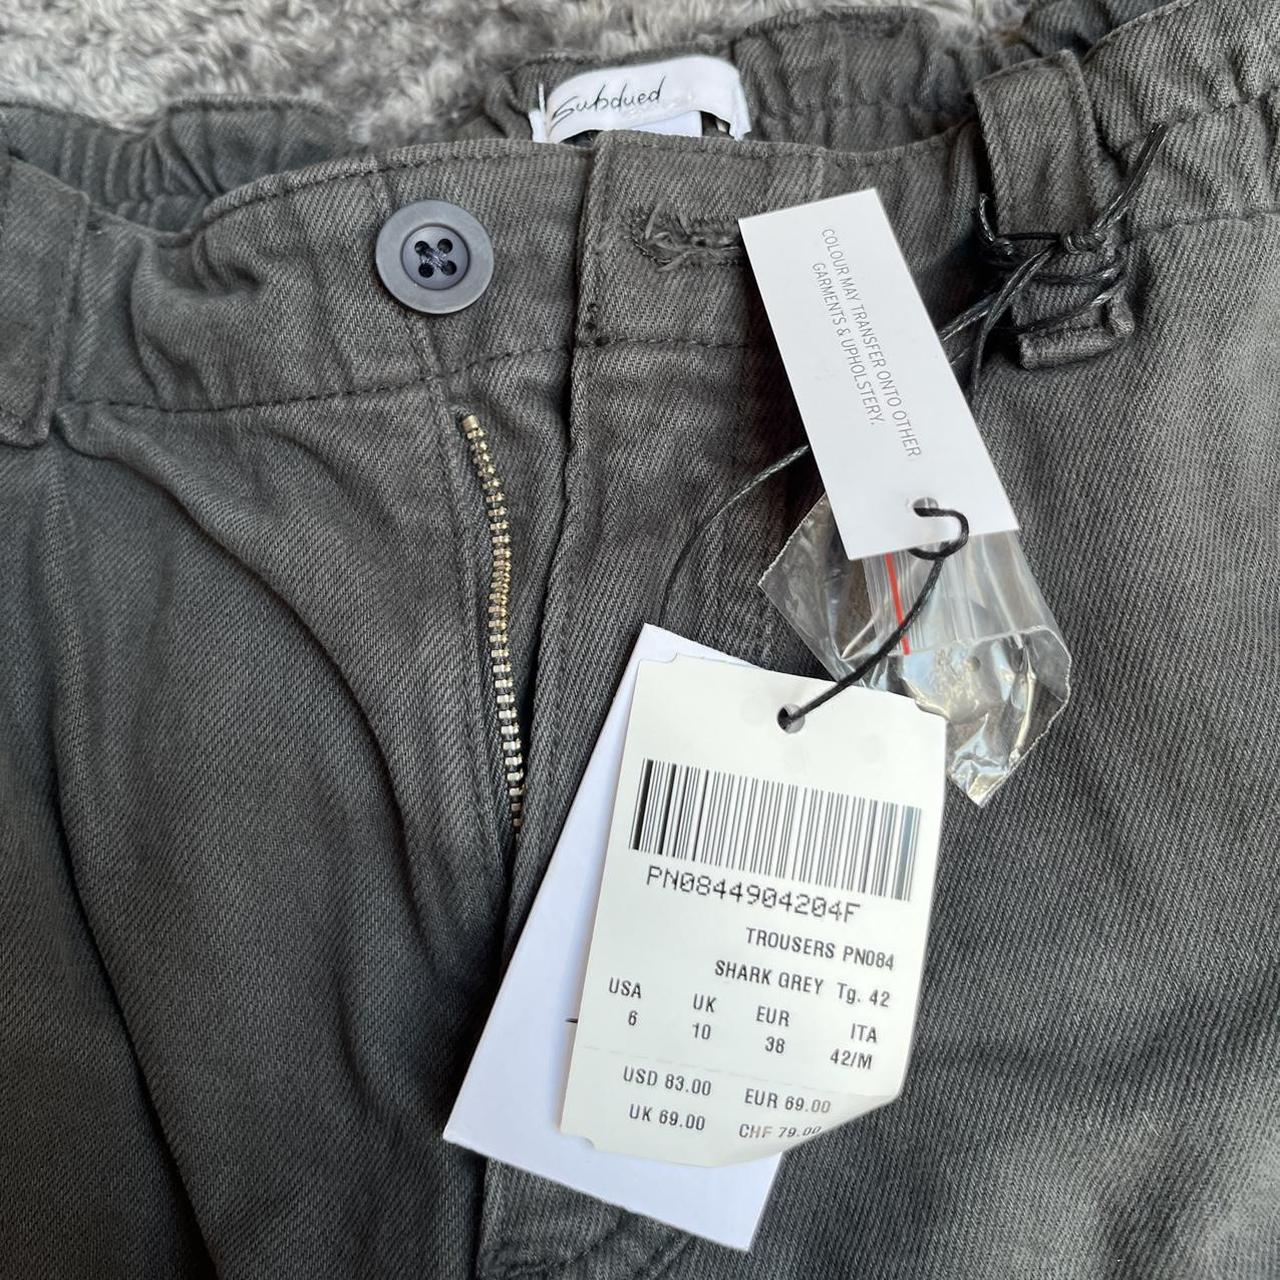 Subdued cargo trousers brand new never worn, Bought